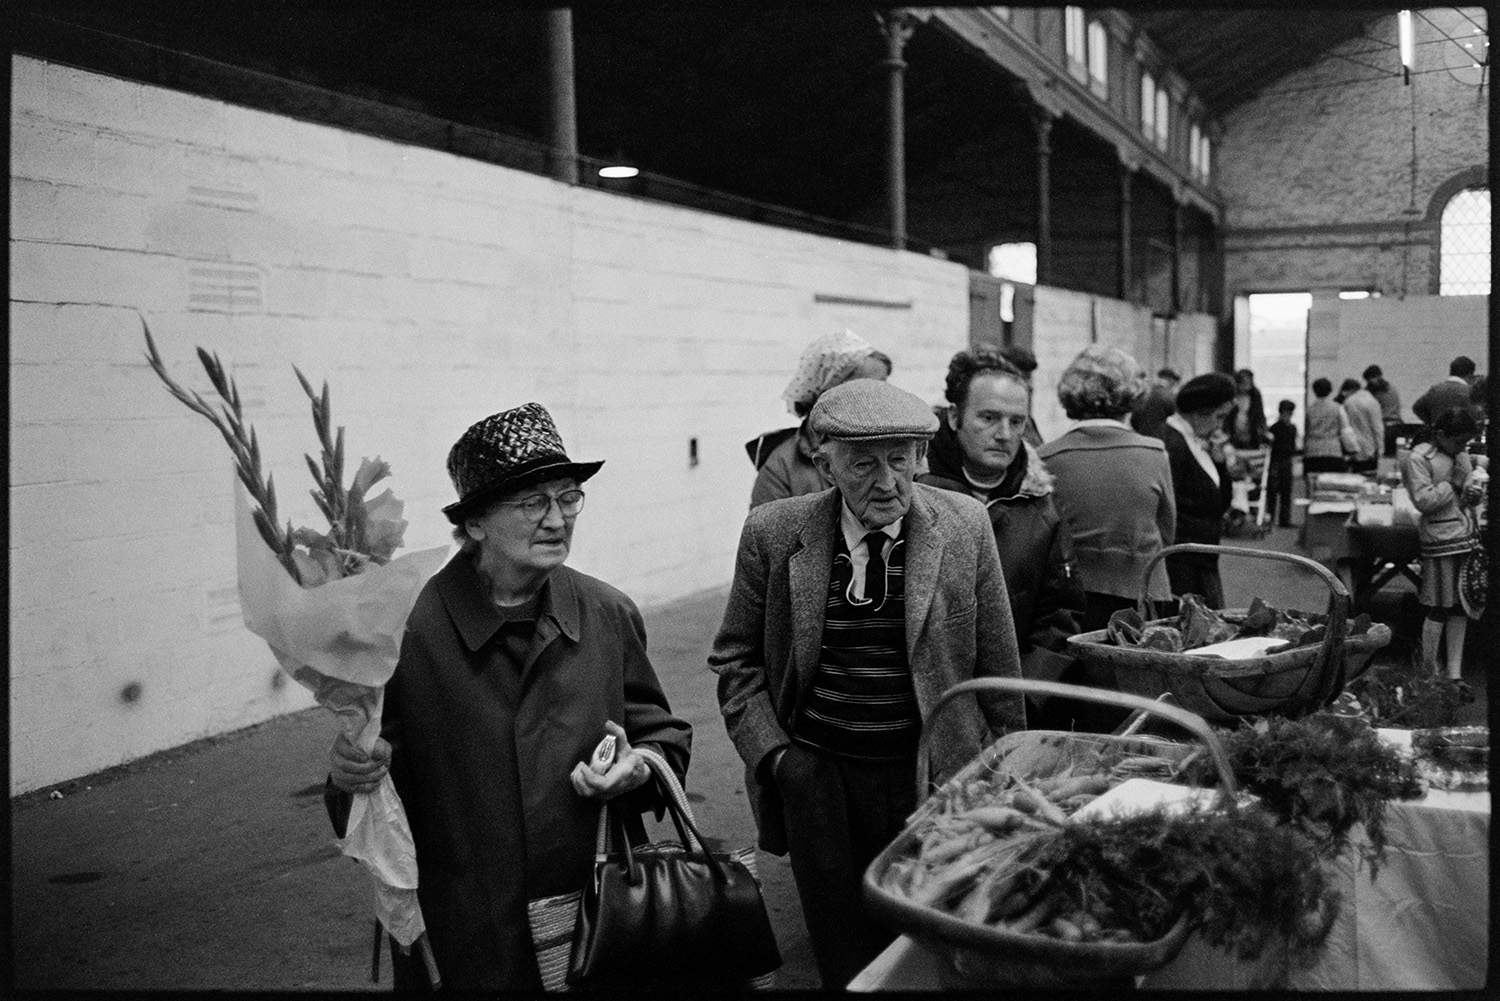 Market hall with stalls, fruit, vegetables and flowers, customers. 
[A man and woman looking at vegetables, including carrots, on a market stall at South Molton Pannier Market. The woman is holding a bunch of flowers and bags. Other customers can be seen in the background.]